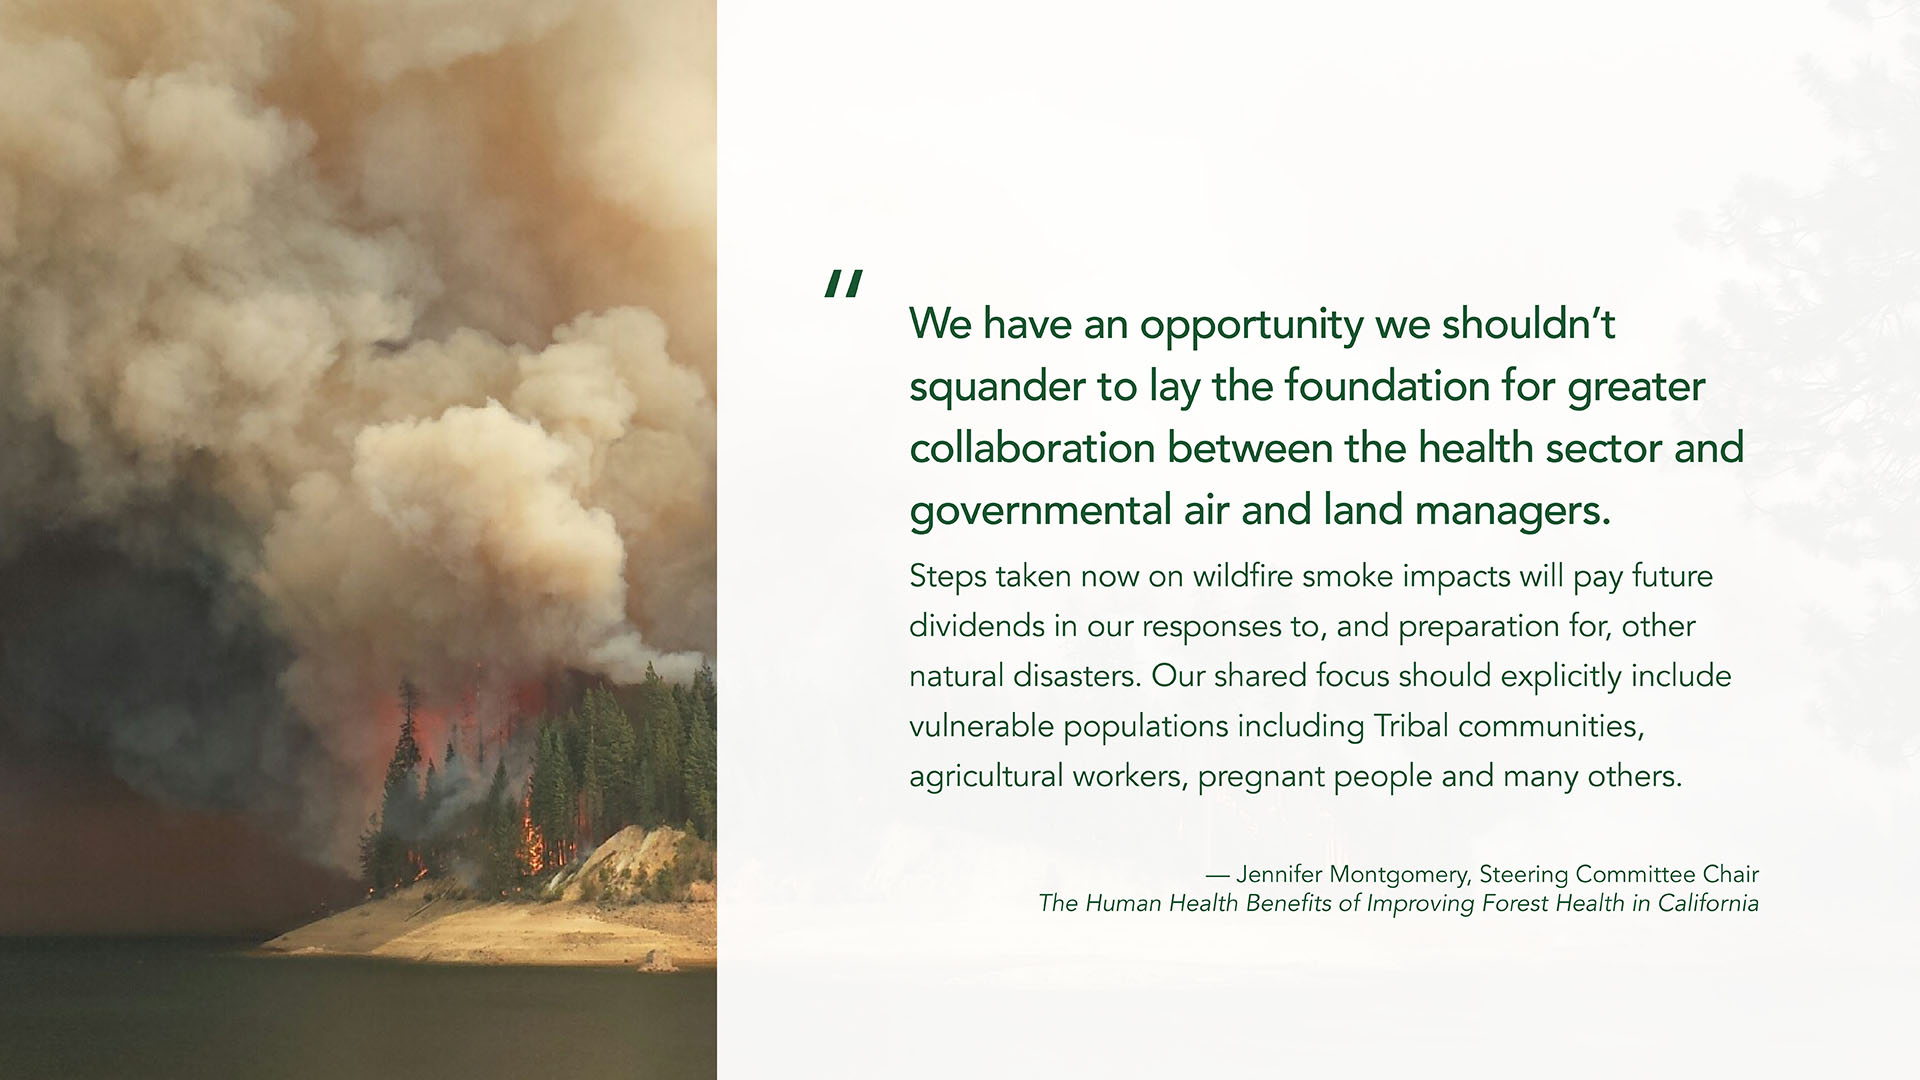 A quote graphic with an image of wildfire on the left column and a quote in large green font on the right from Jennifer Montgomery, Steering Committee Chair The Human Health Benefits of Improving Forest Health in California: "We have an opportunity we shouldn’t squander to lay the foundation for greater collaboration between the health sector and governmental air and land managers. Steps taken now on wildfire smoke impacts will pay future dividends in our responses to, and preparation for, other natural disasters. Our shared focus should explicitly include vulnerable populations including Tribal communities, agricultural workers, pregnant people and many others."